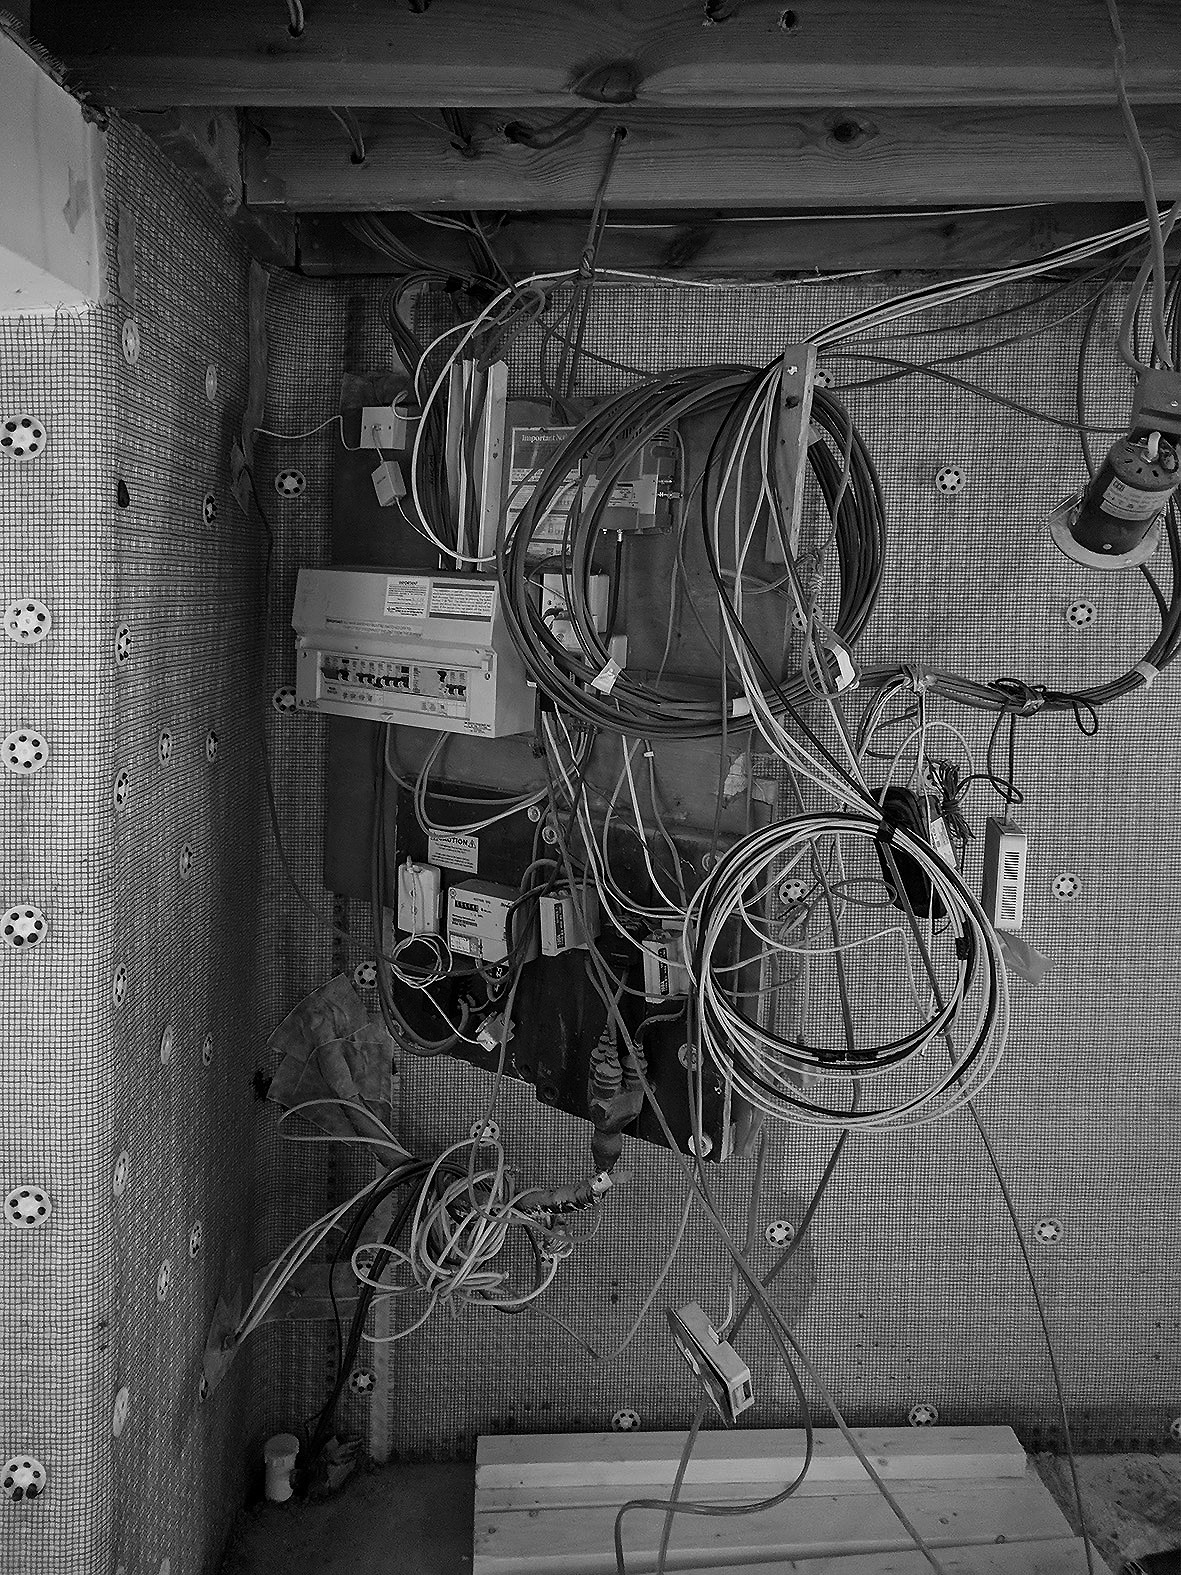  Electical mains and switchboard in front of delta system 